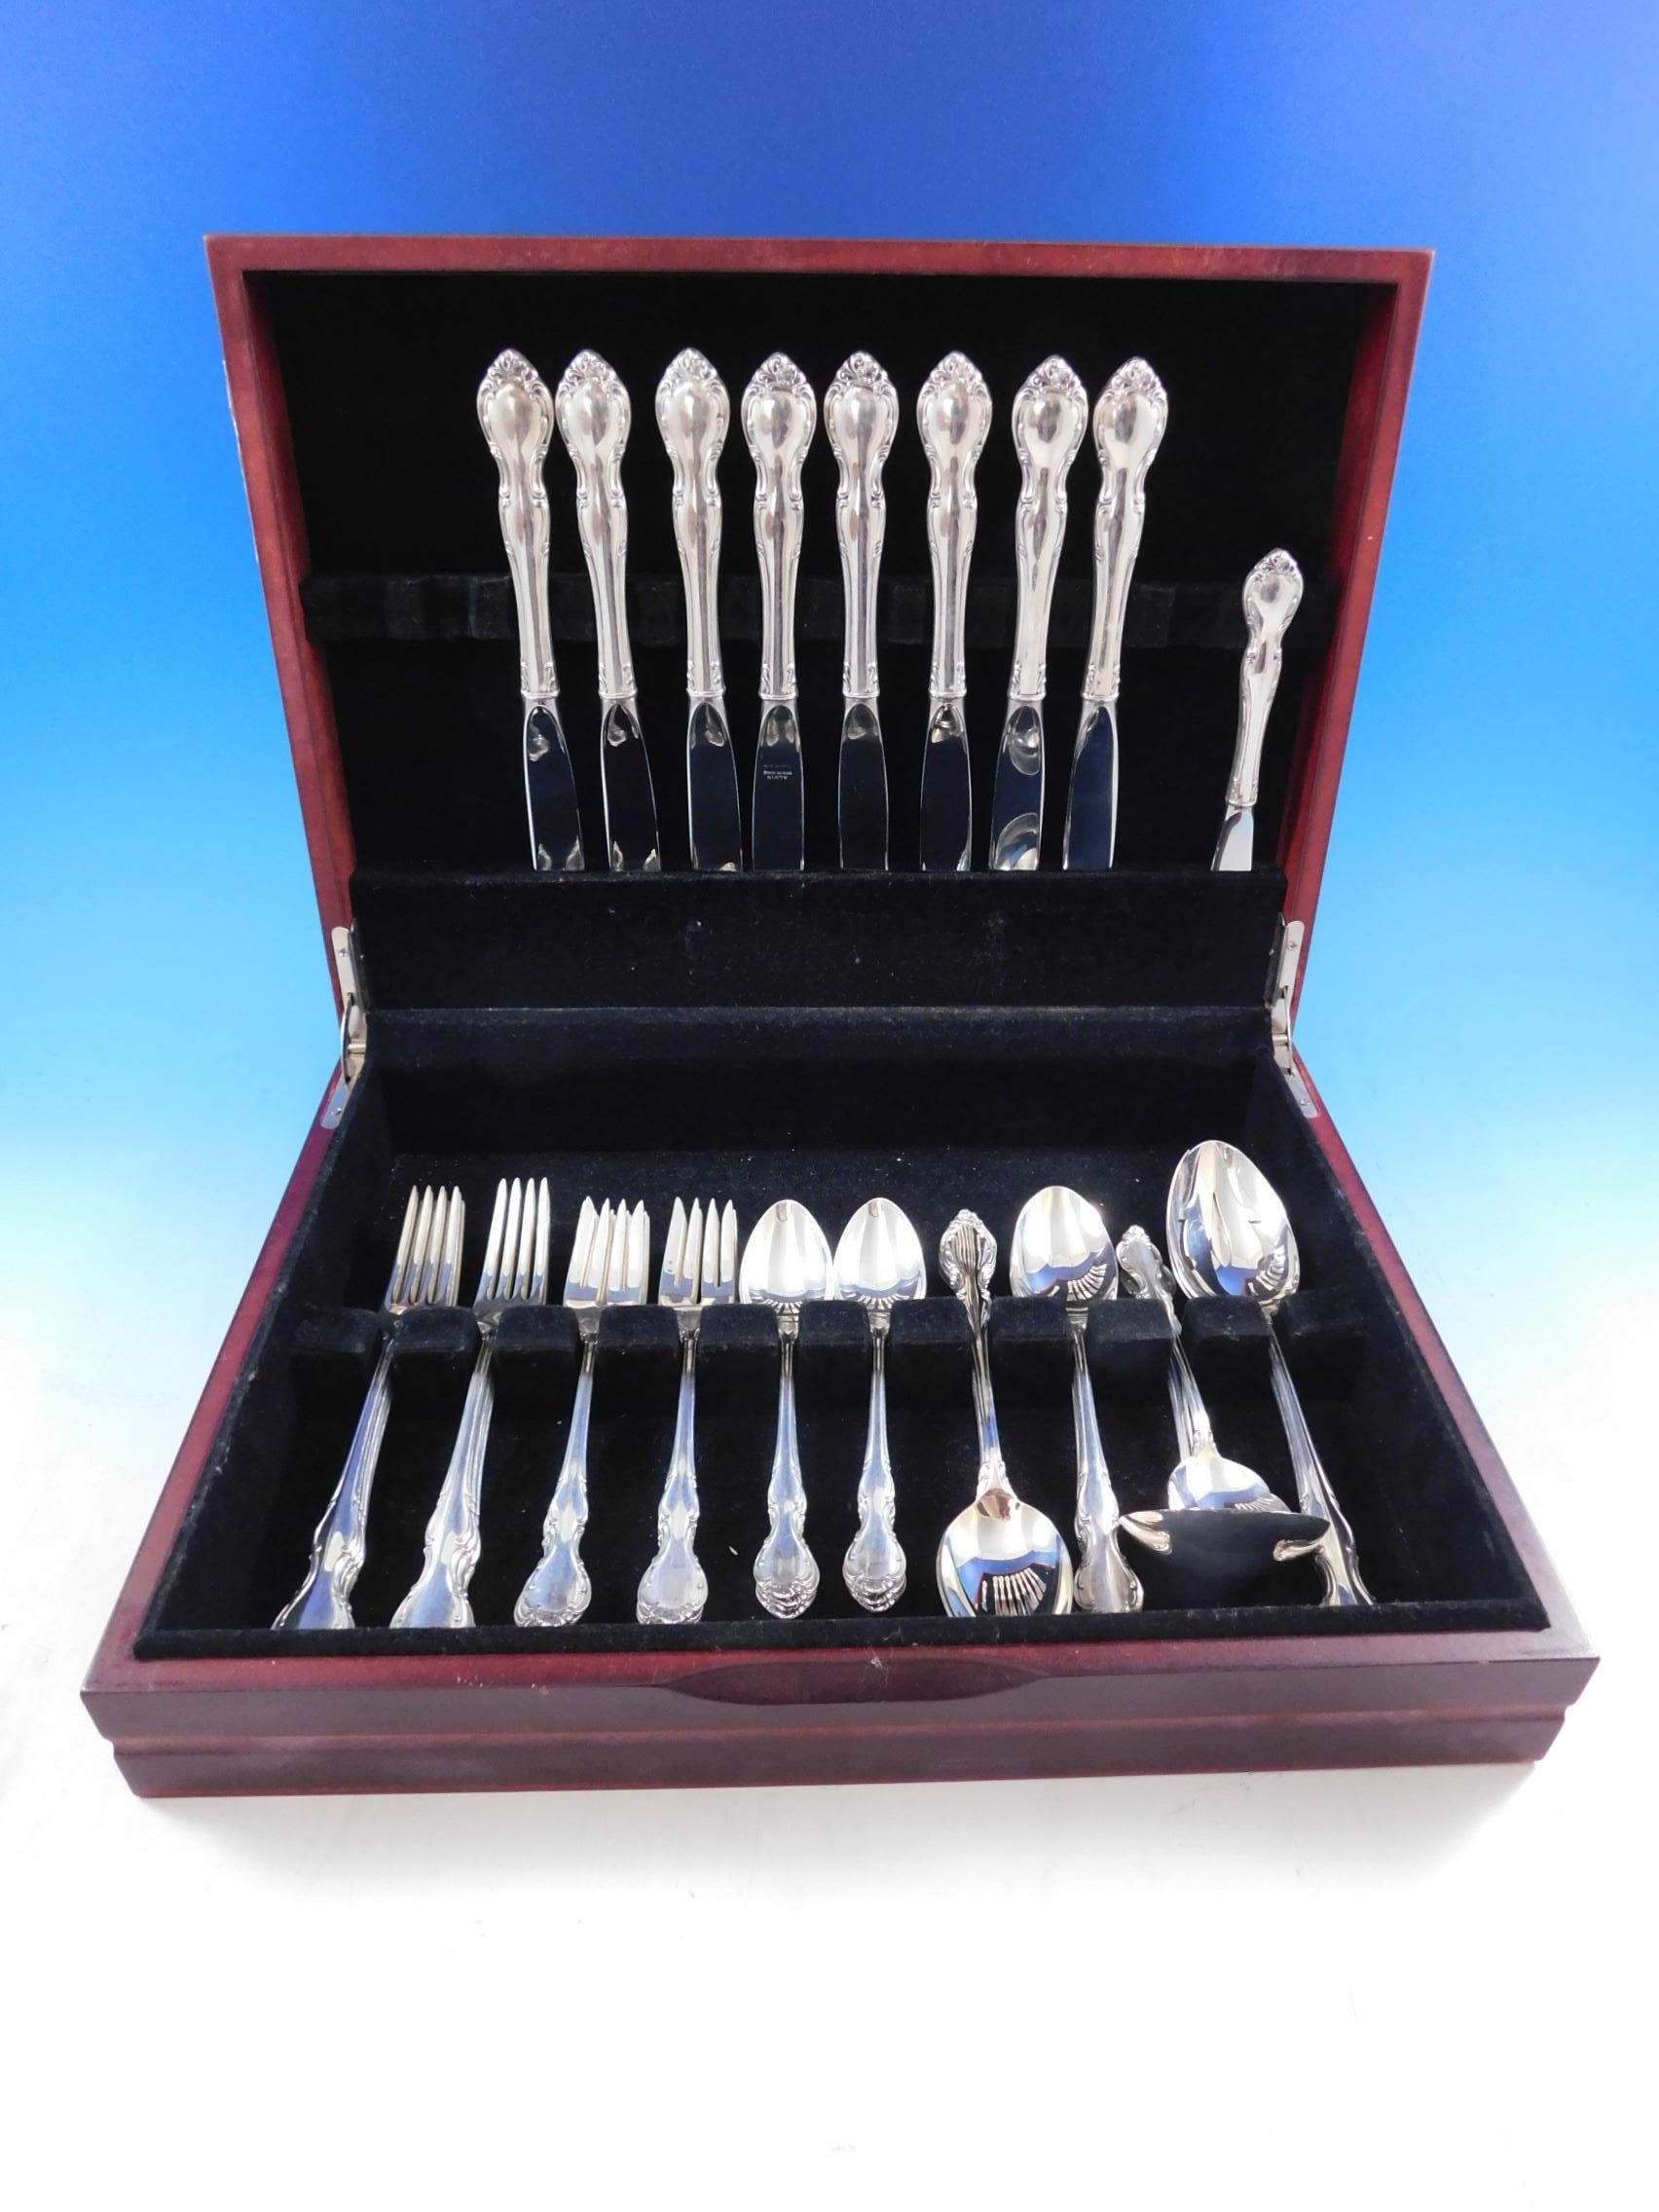 Pirouette by Alvin sterling silver flatware set, 53 pieces. This set includes:

8 knives, 9 1/4